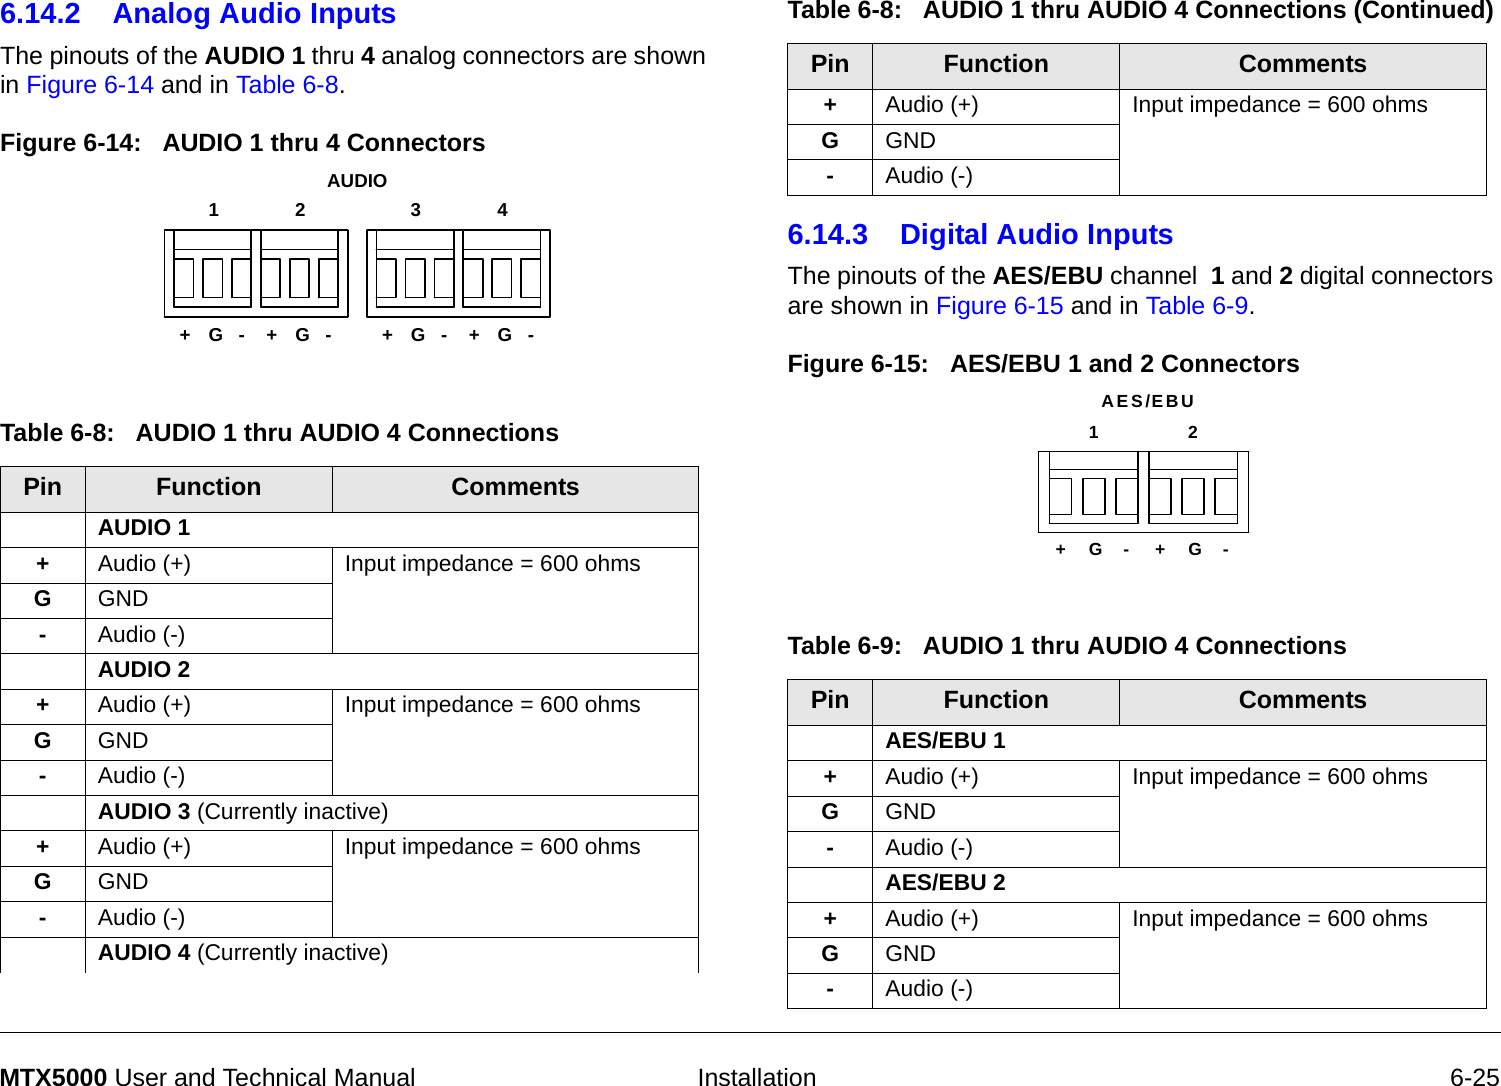   Installation 6-25MTX5000 User and Technical Manual6.14.2 Analog Audio InputsThe pinouts of the AUDIO 1 thru 4 analog connectors are shown in Figure 6-14 and in Table 6-8. Figure 6-14:   AUDIO 1 thru 4 ConnectorsTable 6-8:   AUDIO 1 thru AUDIO 4 Connections Pin Function CommentsAUDIO 1+Audio (+) Input impedance = 600 ohmsGGND-Audio (-)AUDIO 2+Audio (+) Input impedance = 600 ohmsGGND-Audio (-)AUDIO 3 (Currently inactive)+Audio (+) Input impedance = 600 ohmsGGND-Audio (-)AUDIO 4 (Currently inactive)+G- +G- +G-+G-12 34AUDIO6.14.3 Digital Audio Inputs The pinouts of the AES/EBU channel  1 and 2 digital connectors are shown in Figure 6-15 and in Table 6-9.  Figure 6-15:   AES/EBU 1 and 2 Connectors+Audio (+) Input impedance = 600 ohmsGGND-Audio (-)Table 6-9:   AUDIO 1 thru AUDIO 4 ConnectionsPin Function CommentsAES/EBU 1+Audio (+) Input impedance = 600 ohmsGGND-Audio (-)AES/EBU 2+Audio (+) Input impedance = 600 ohmsGGND-Audio (-)Table 6-8:   AUDIO 1 thru AUDIO 4 Connections (Continued)Pin Function Comments+G-+G-AES/EBU12